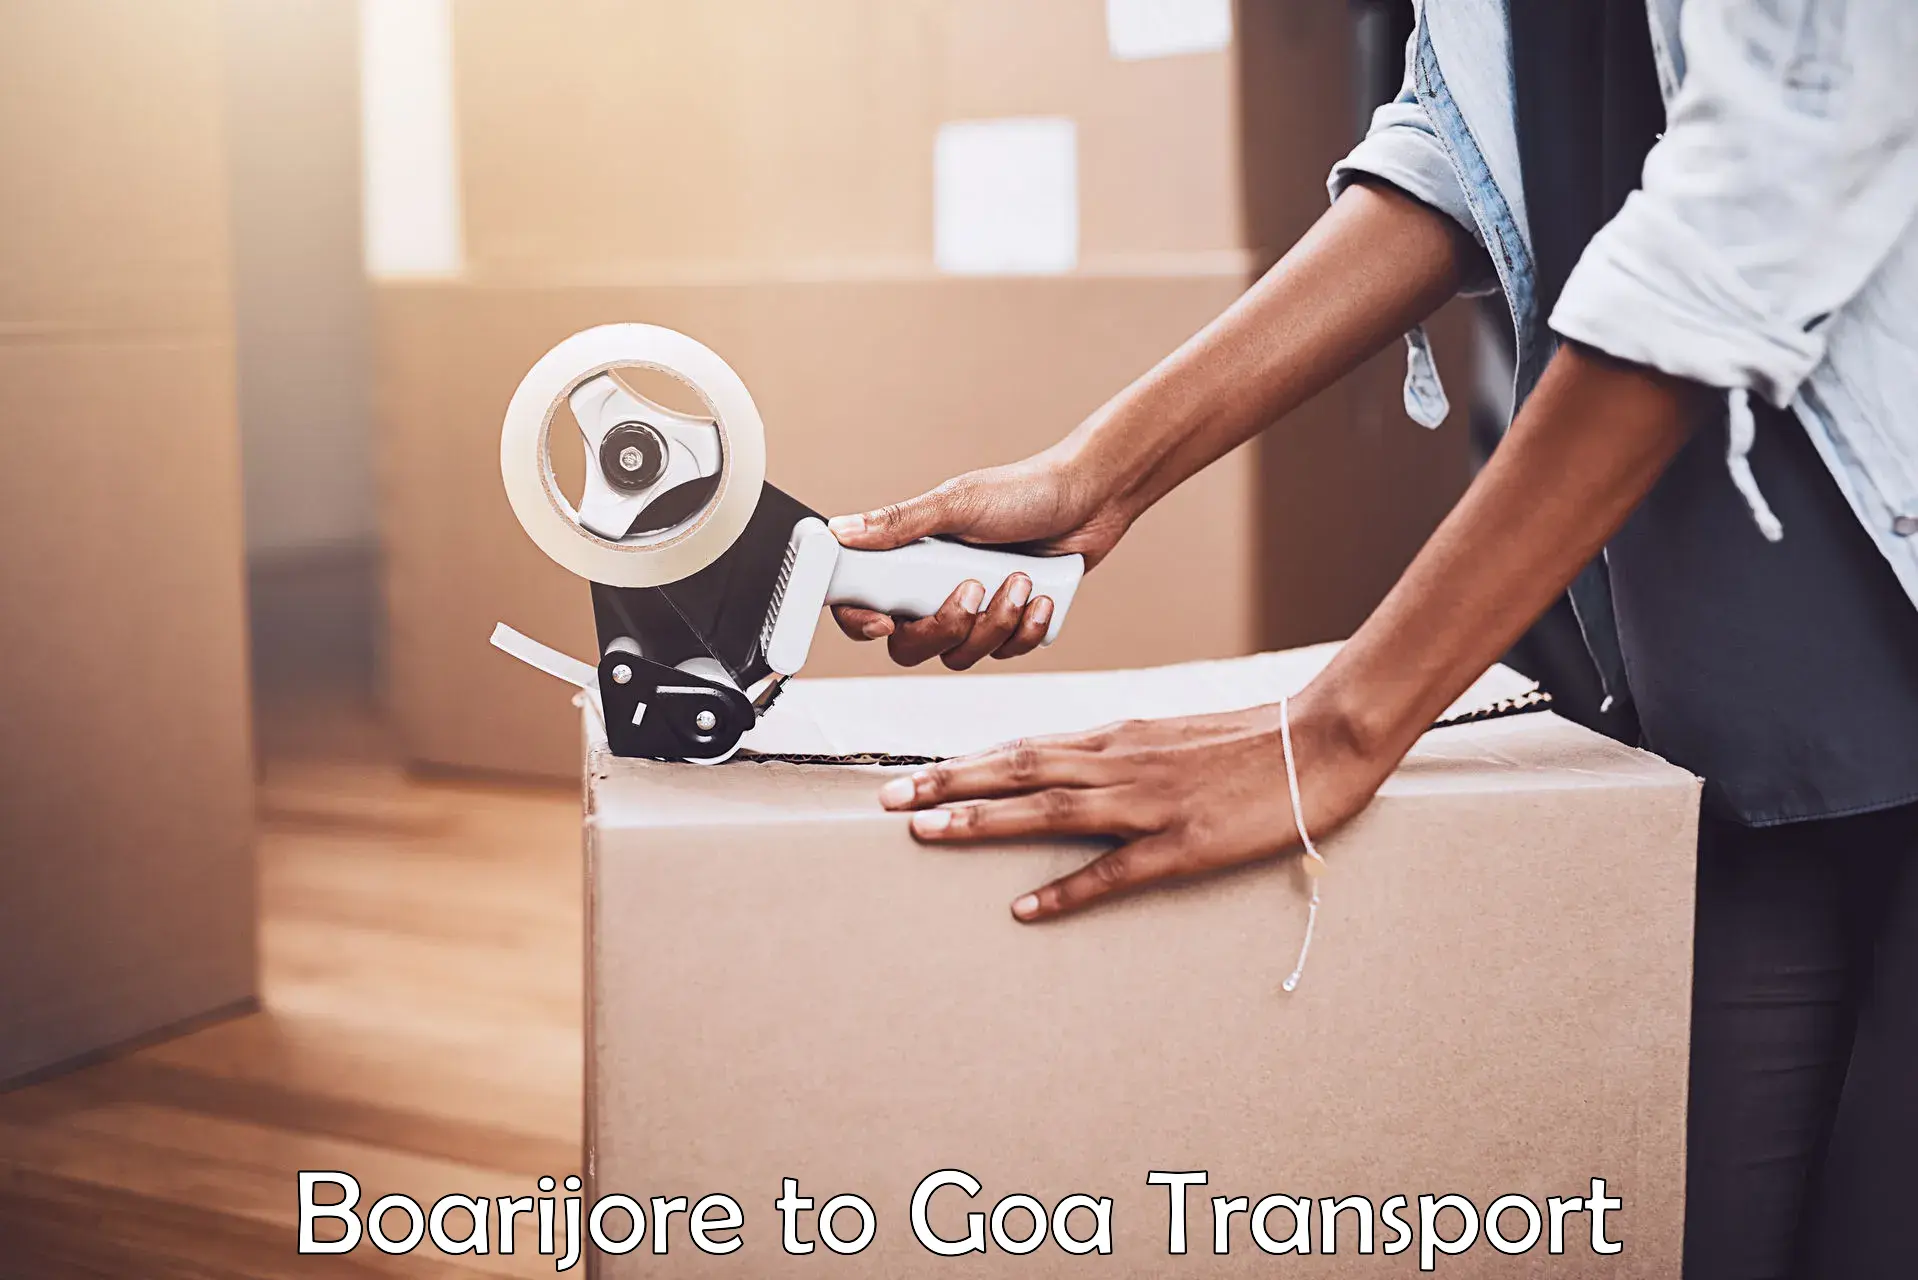 Online transport booking Boarijore to Goa